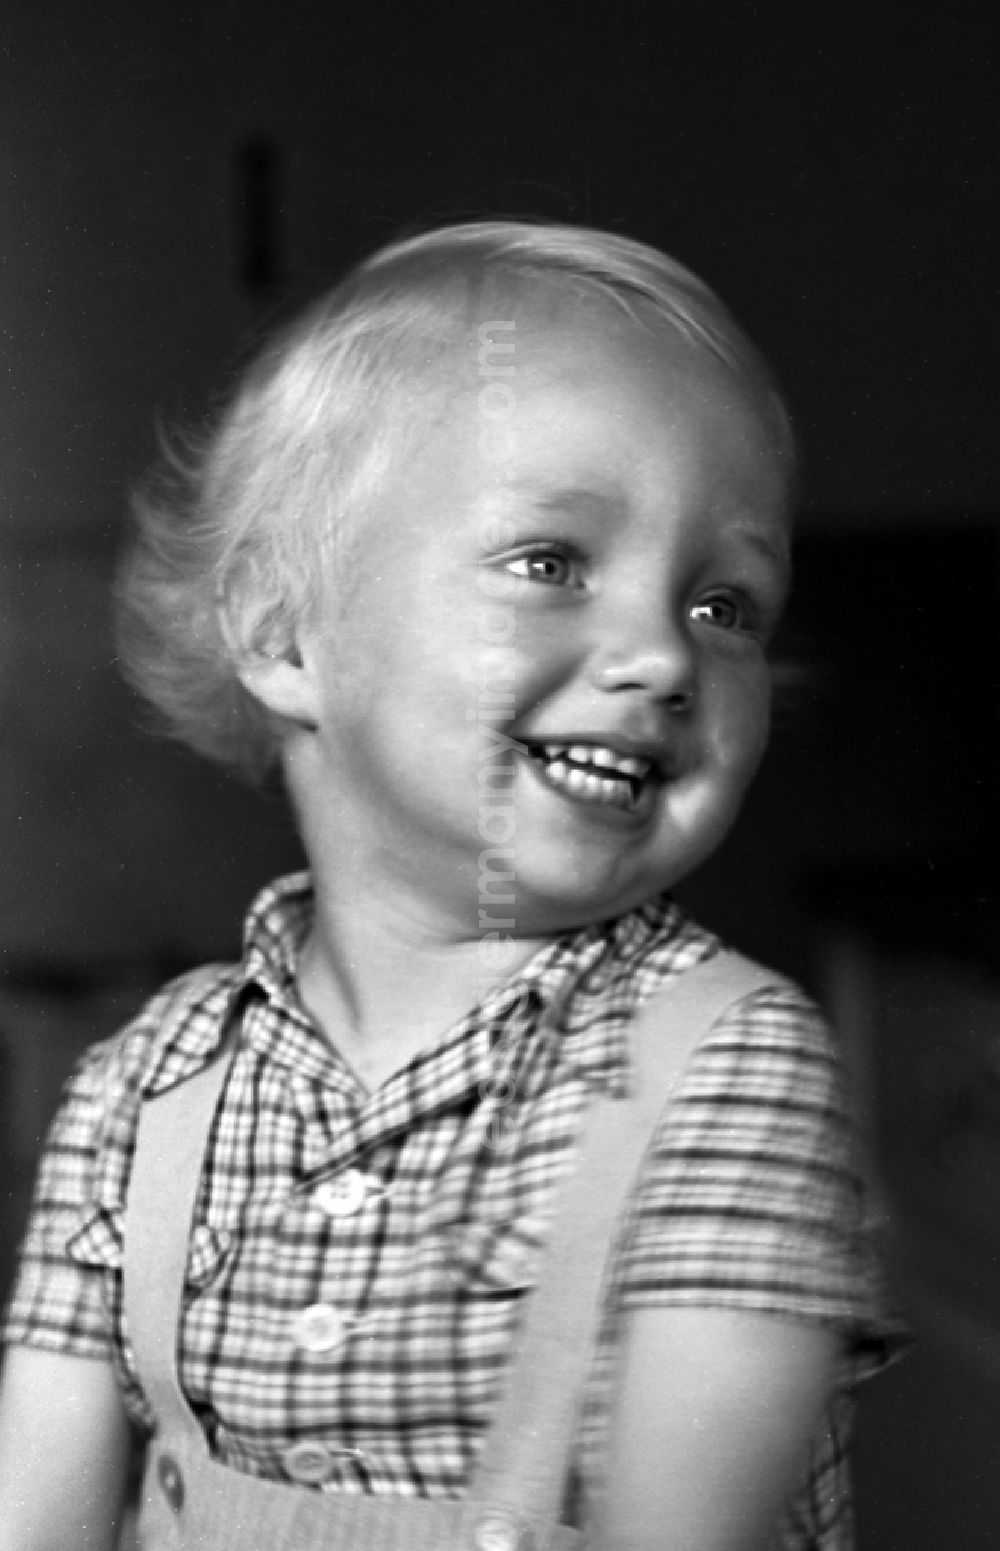 GDR picture archive: Merseburg - A small boy in the portrait in Merseburg in the federal state Saxony-Anhalt in Germany